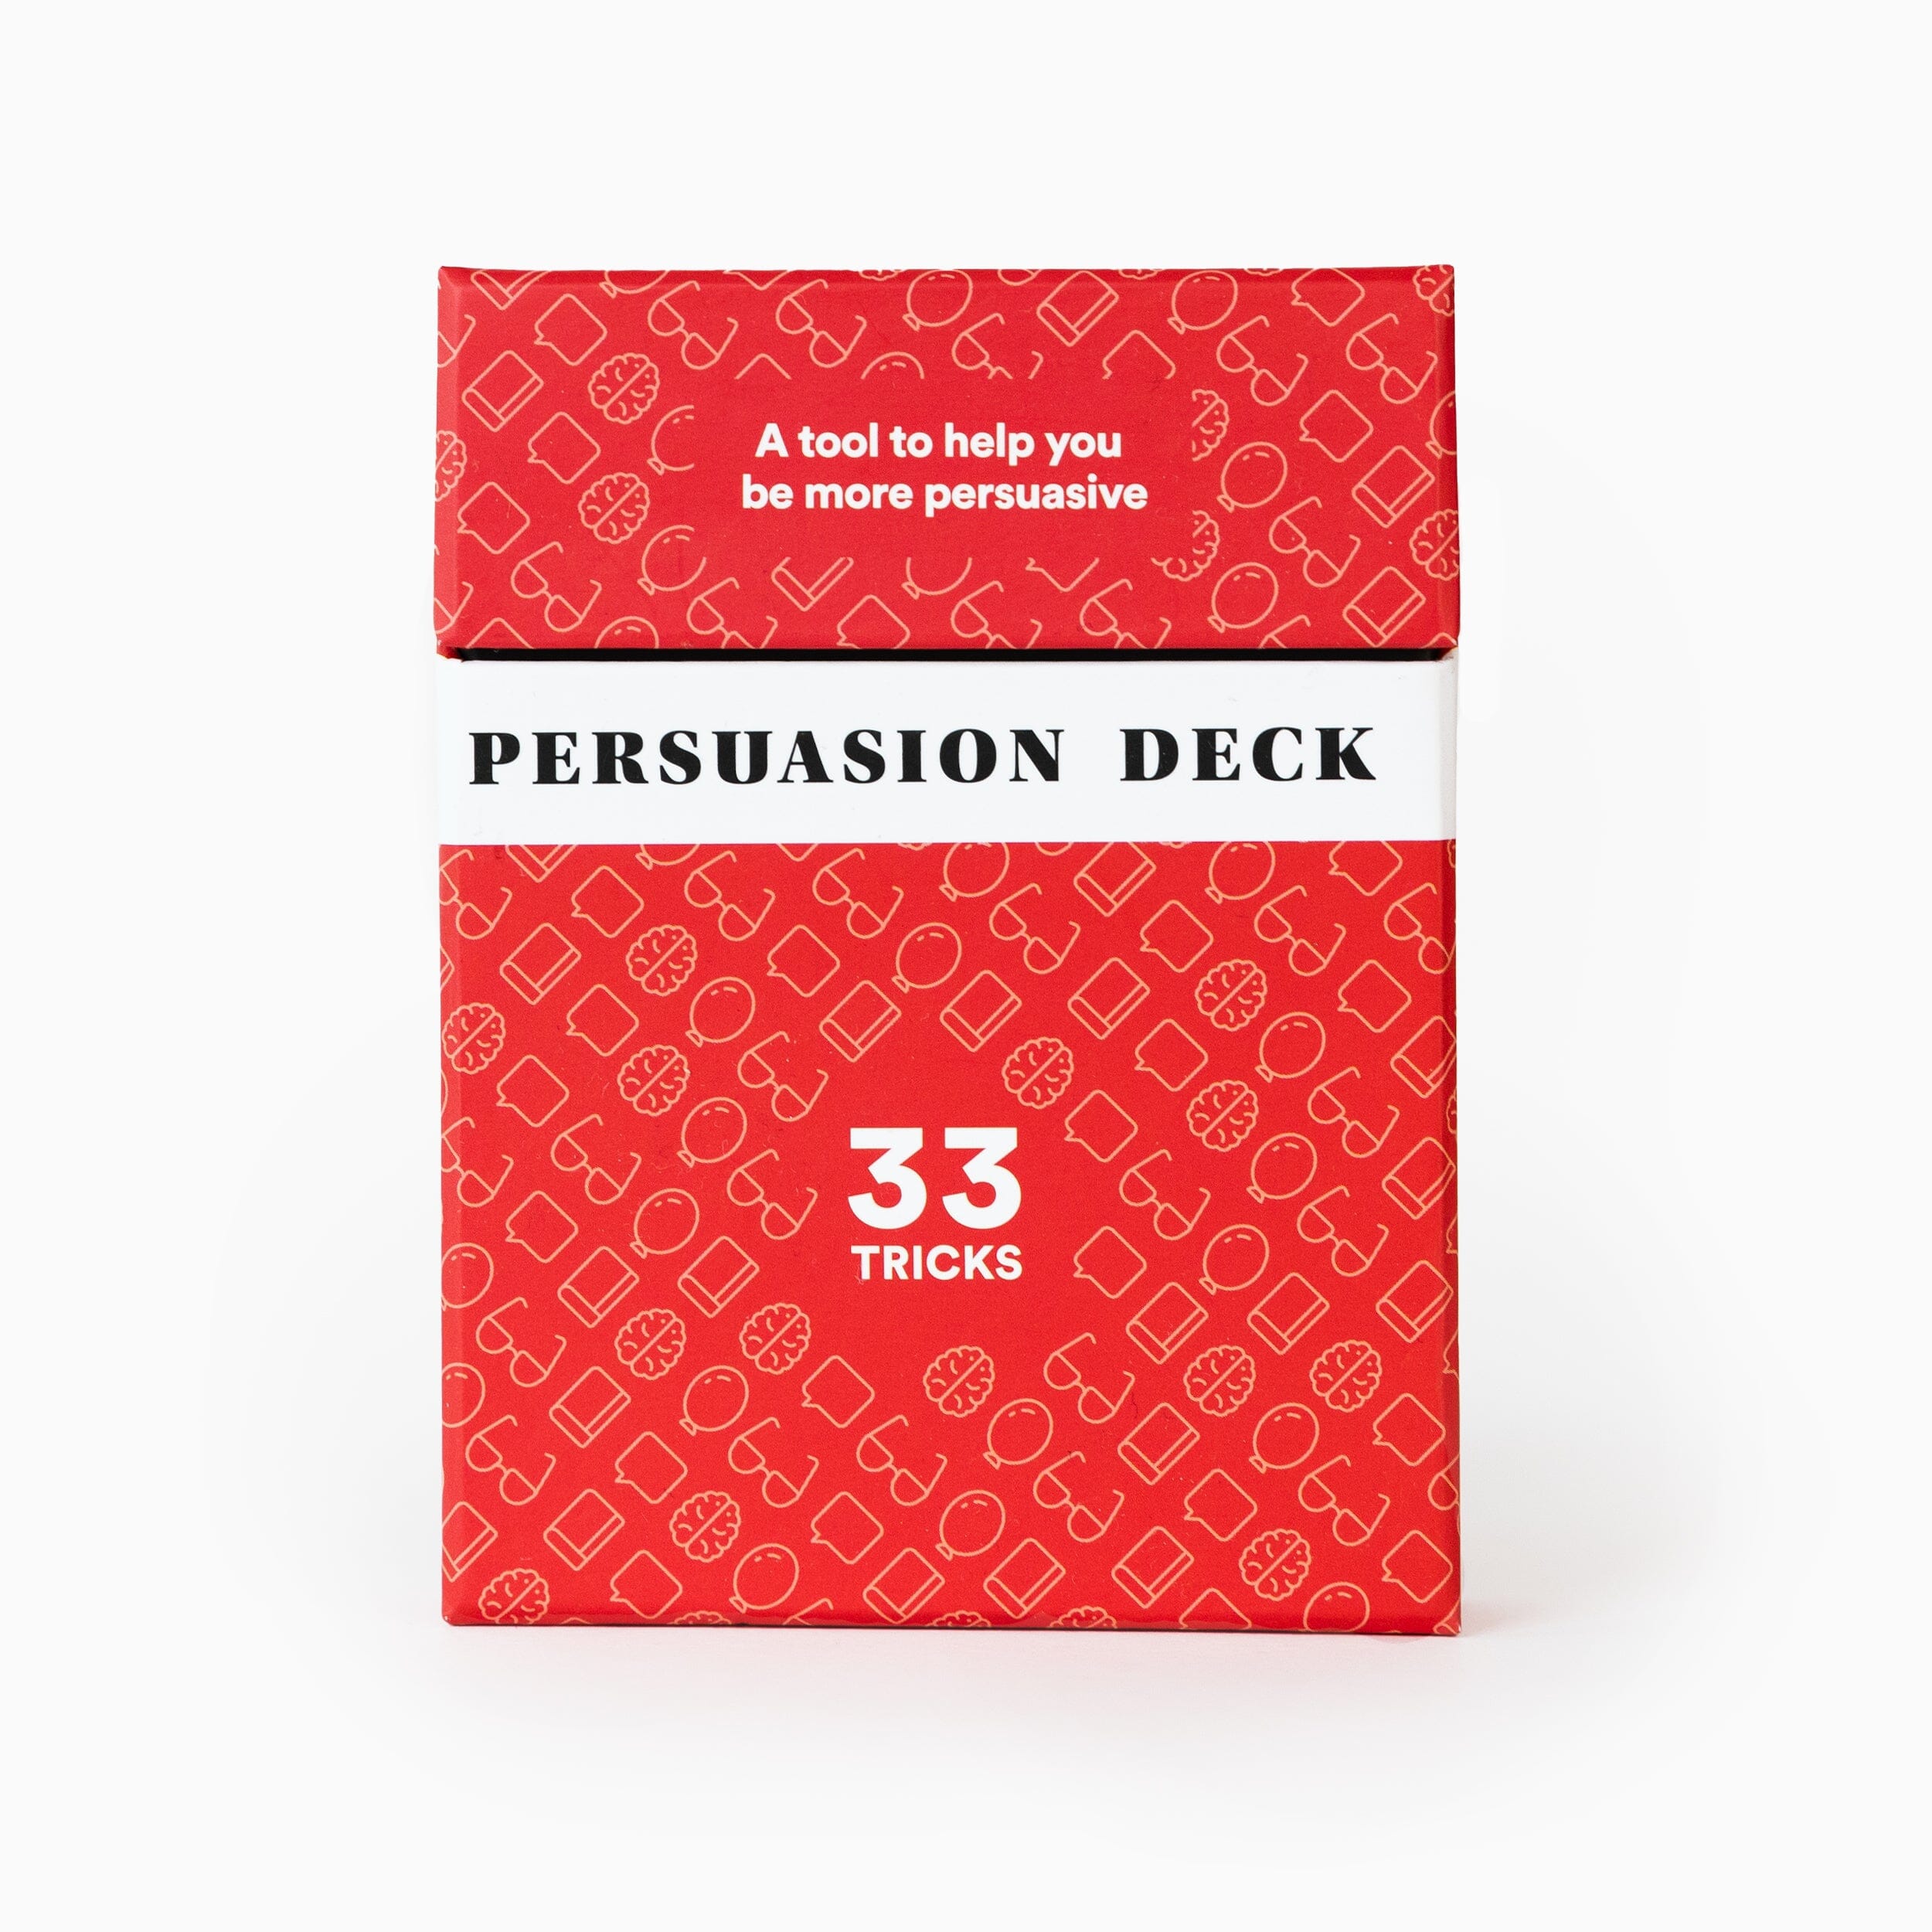 Persuasion Deck Card Deck Professional Growth